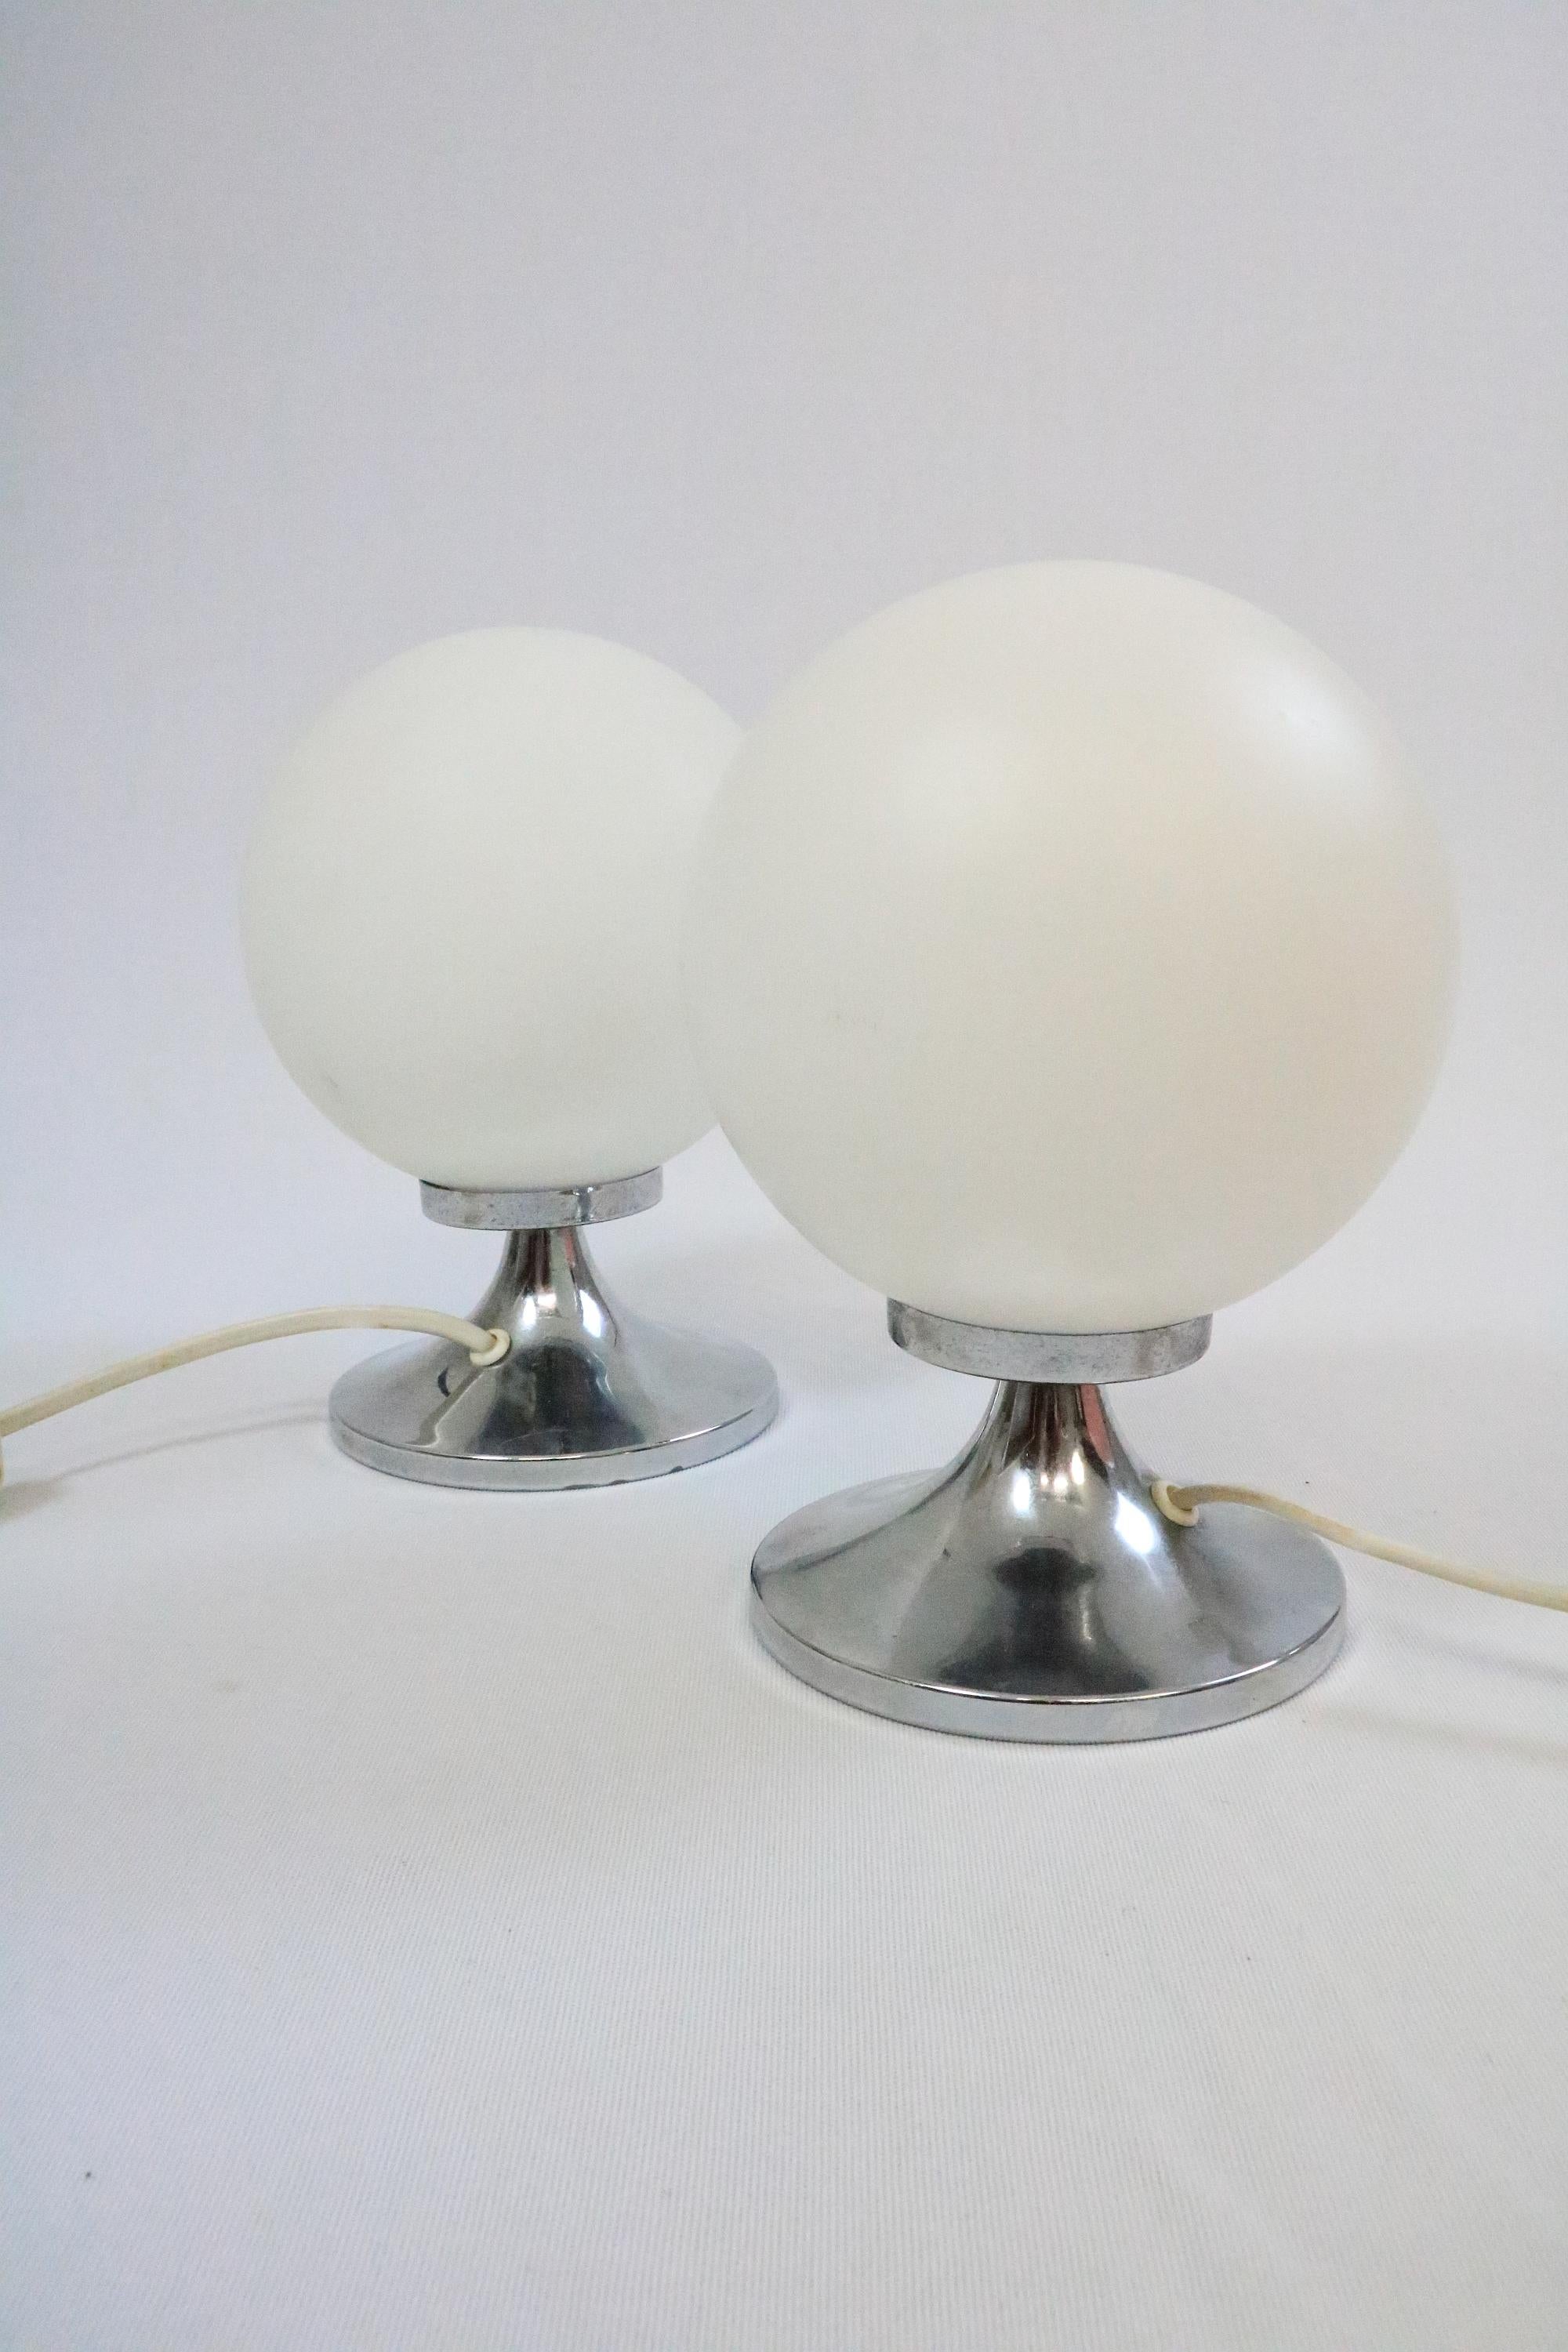 A beautiful set of two small table lamps with glass globes and a metal base in tulip design.

Manufacturer: Wortmann & Filz

In good condition with slight traces in the chrome.

The old cables will be replacedin a new textile cable (see